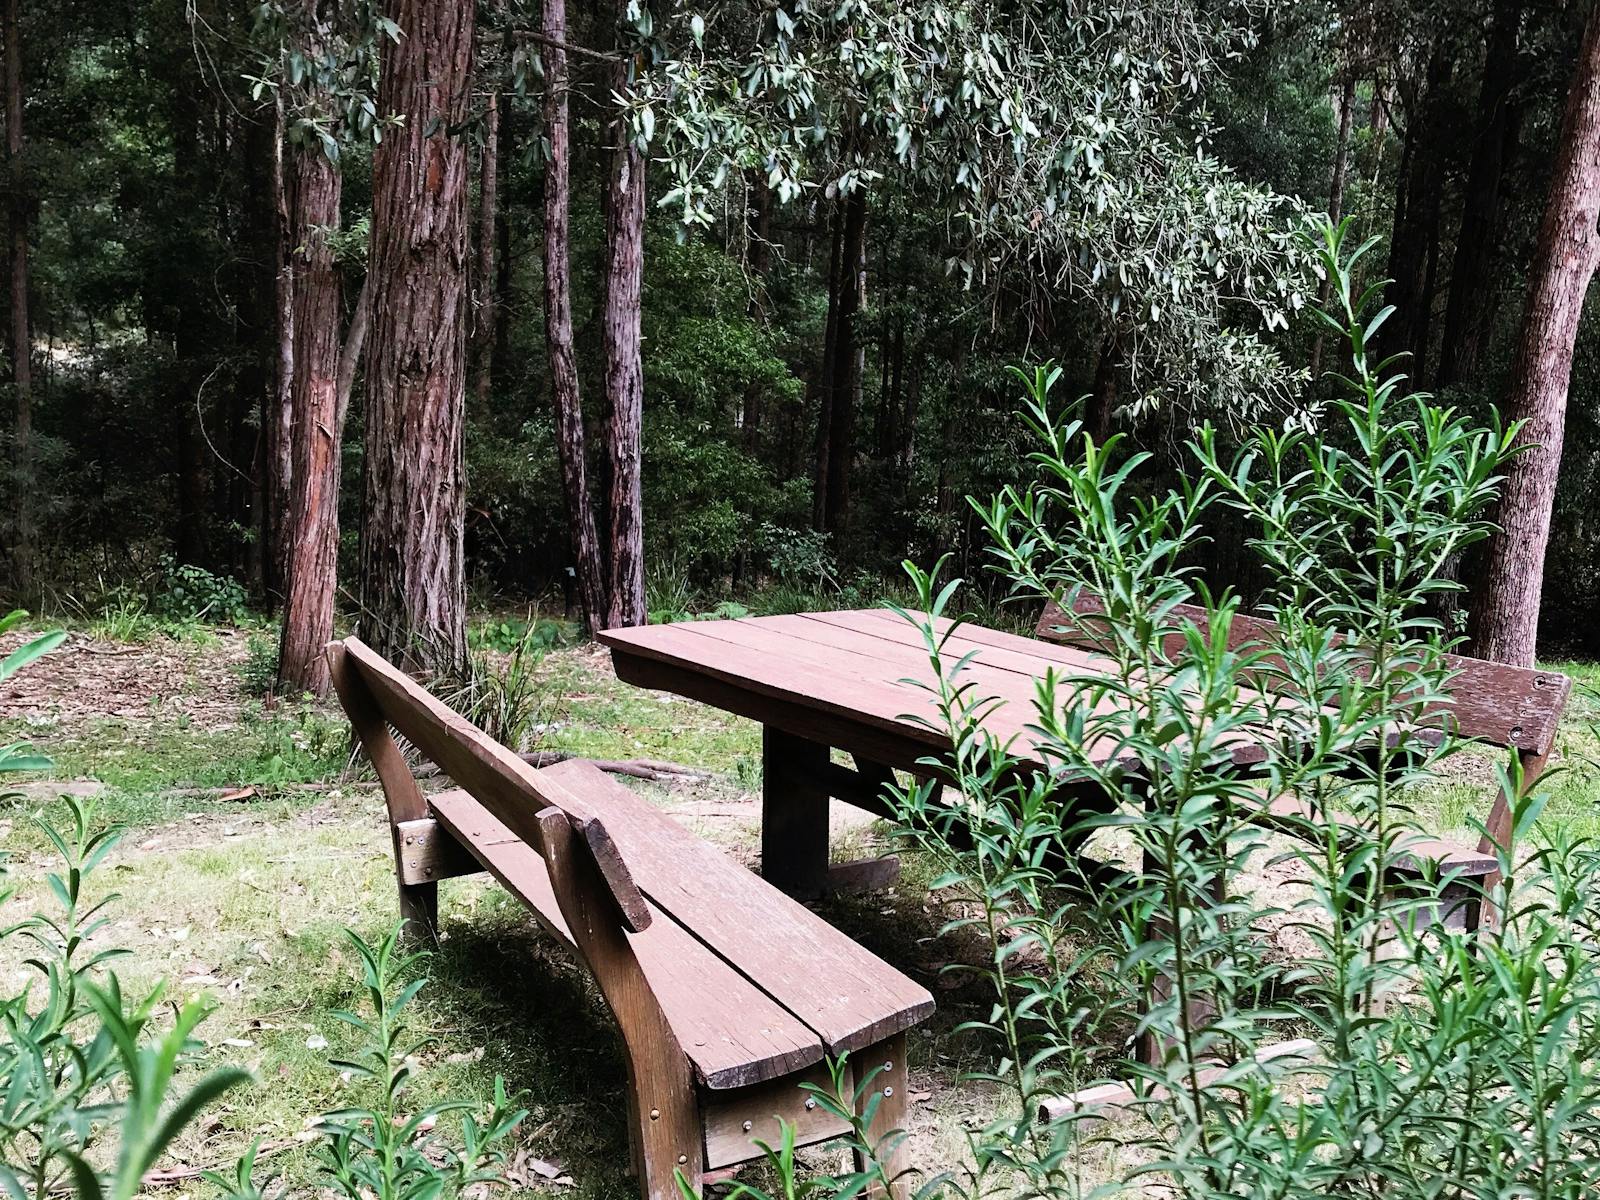 Quiet spots to sit and enjoy the bush.